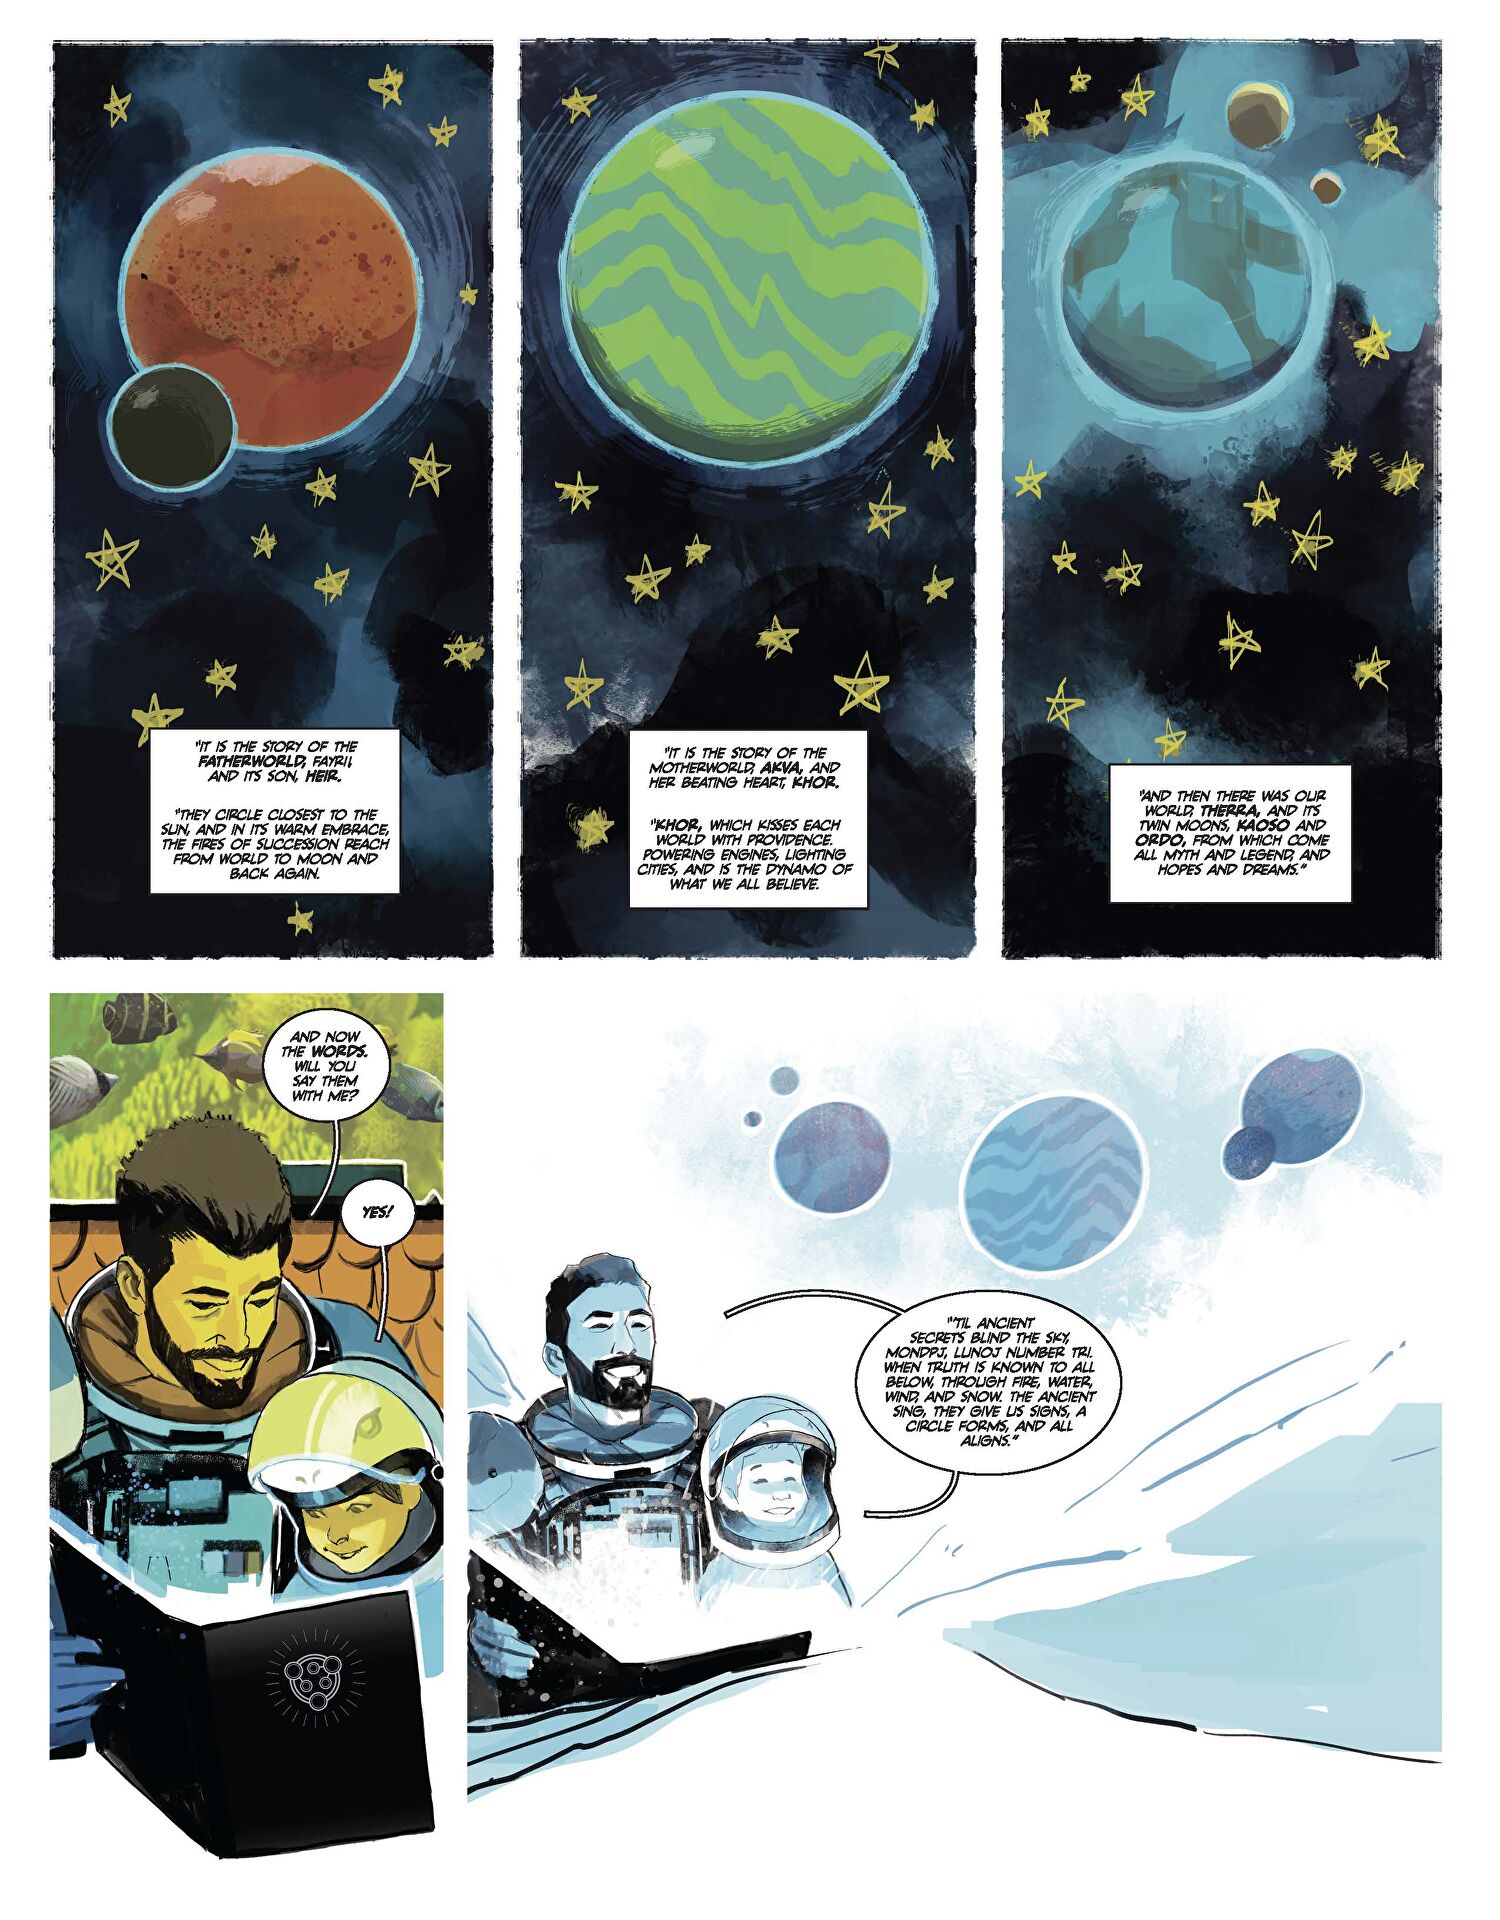 Interior page from Foundations featuring planets and a father reading to a child